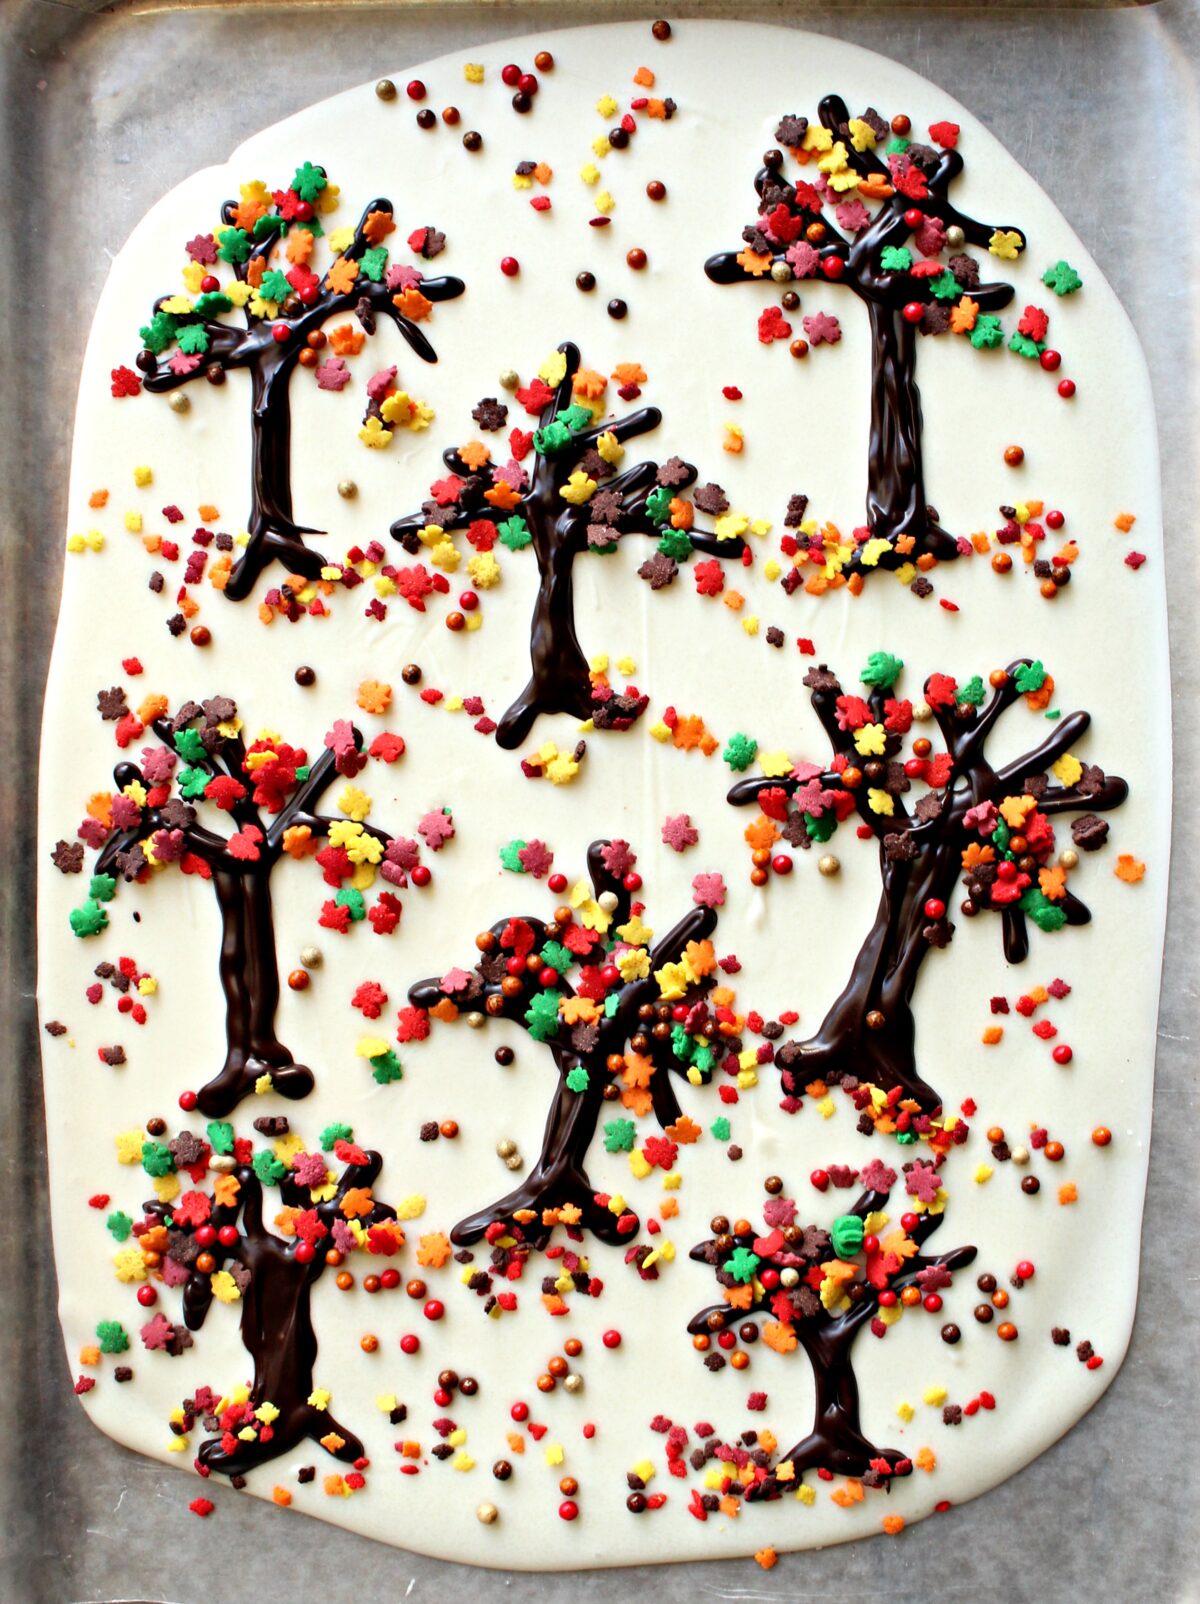 White chocolate bark with piped dark chocolate trees with fall leaf sprinkles.